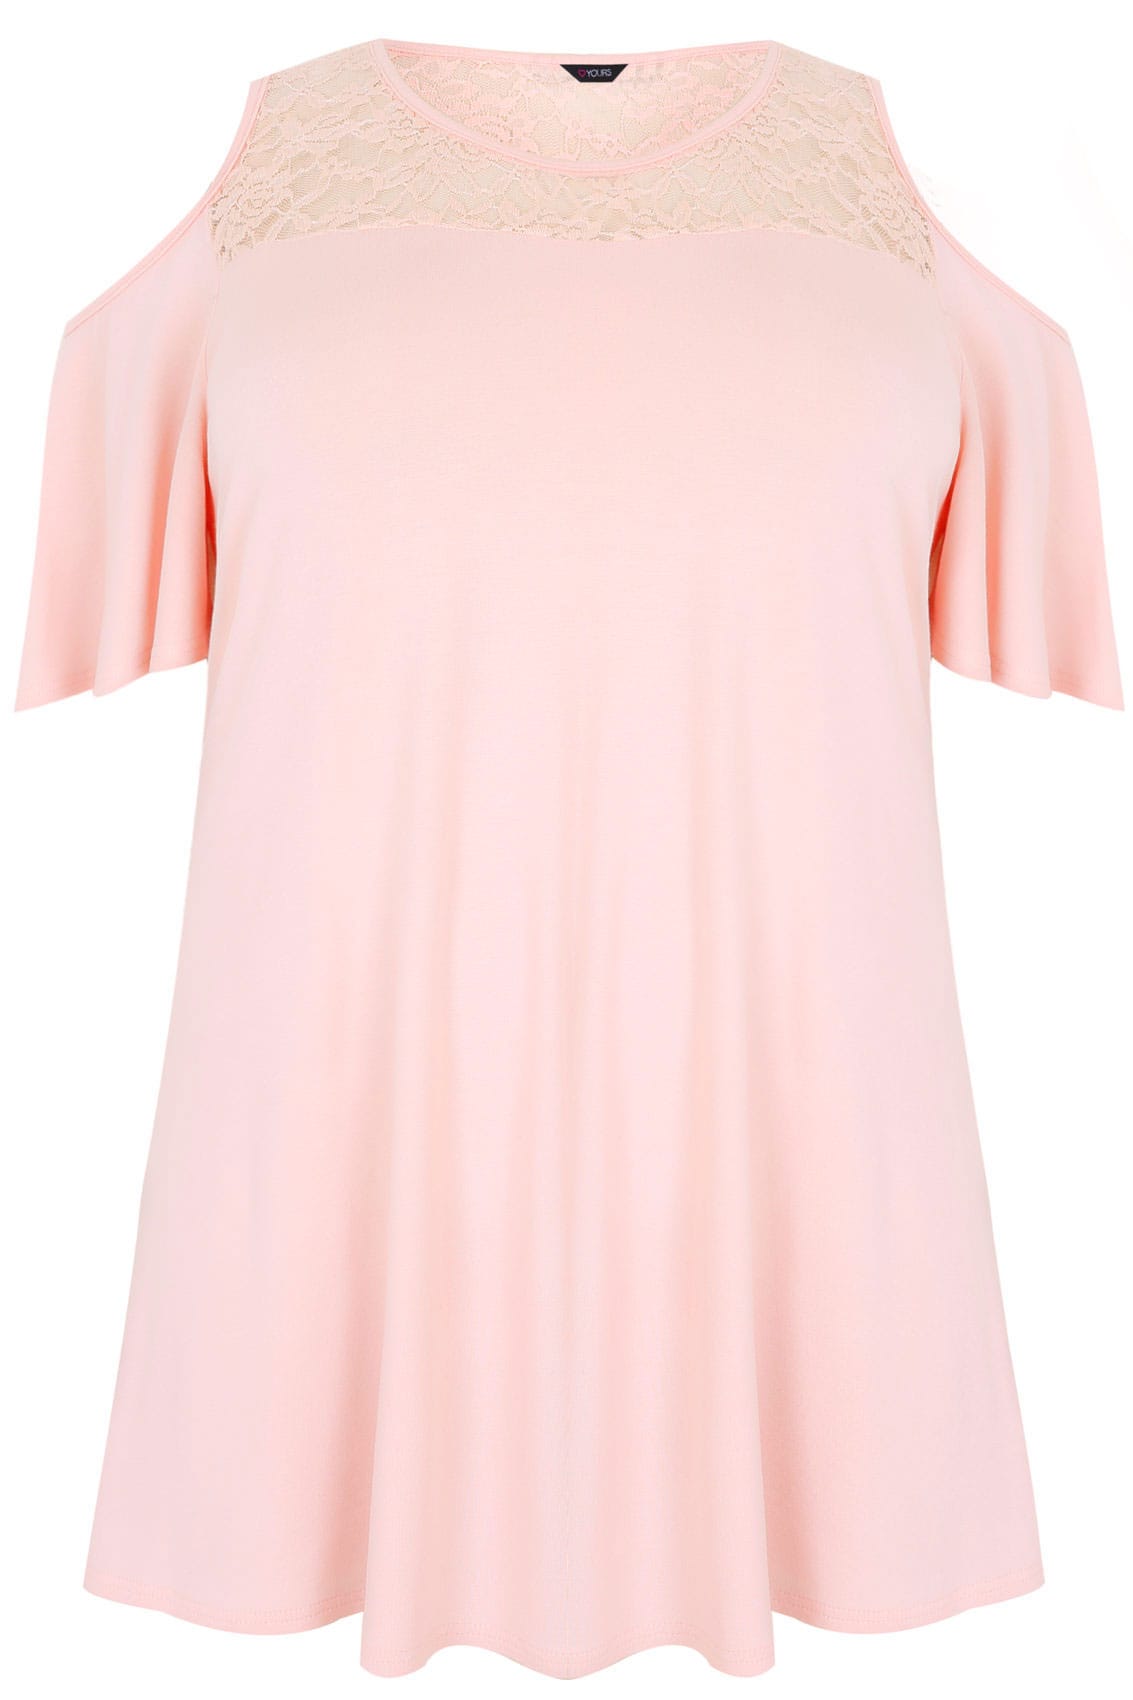 Pink Cold Shoulder Longline Jersey Top With Lace Panel, Plus size 16 to 36